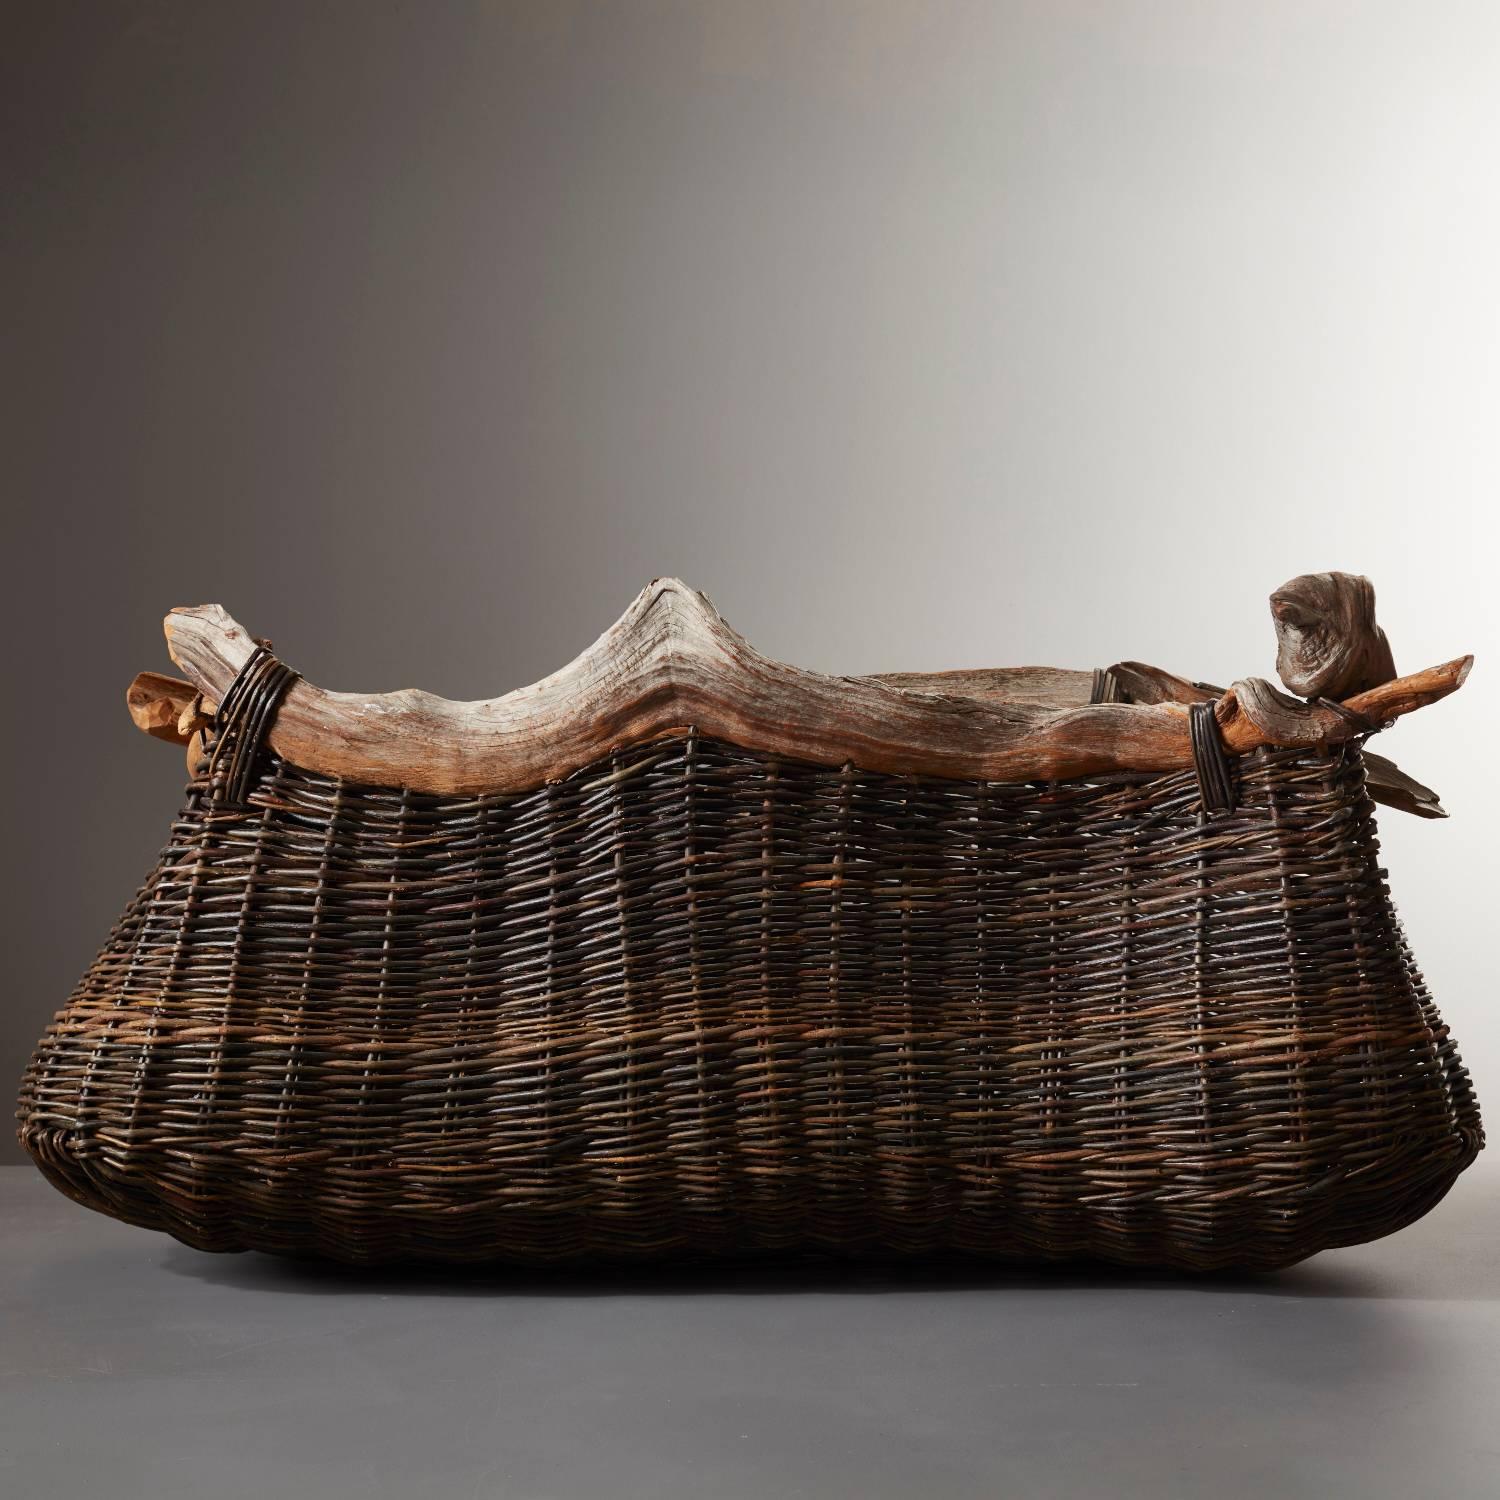 Constructed from local willow and bog pine- this woven basket by master basket-maker Joe Hogan showcases his deep understanding between material, craft and place.

This basket was made upside down, with the base being made last. Using materials